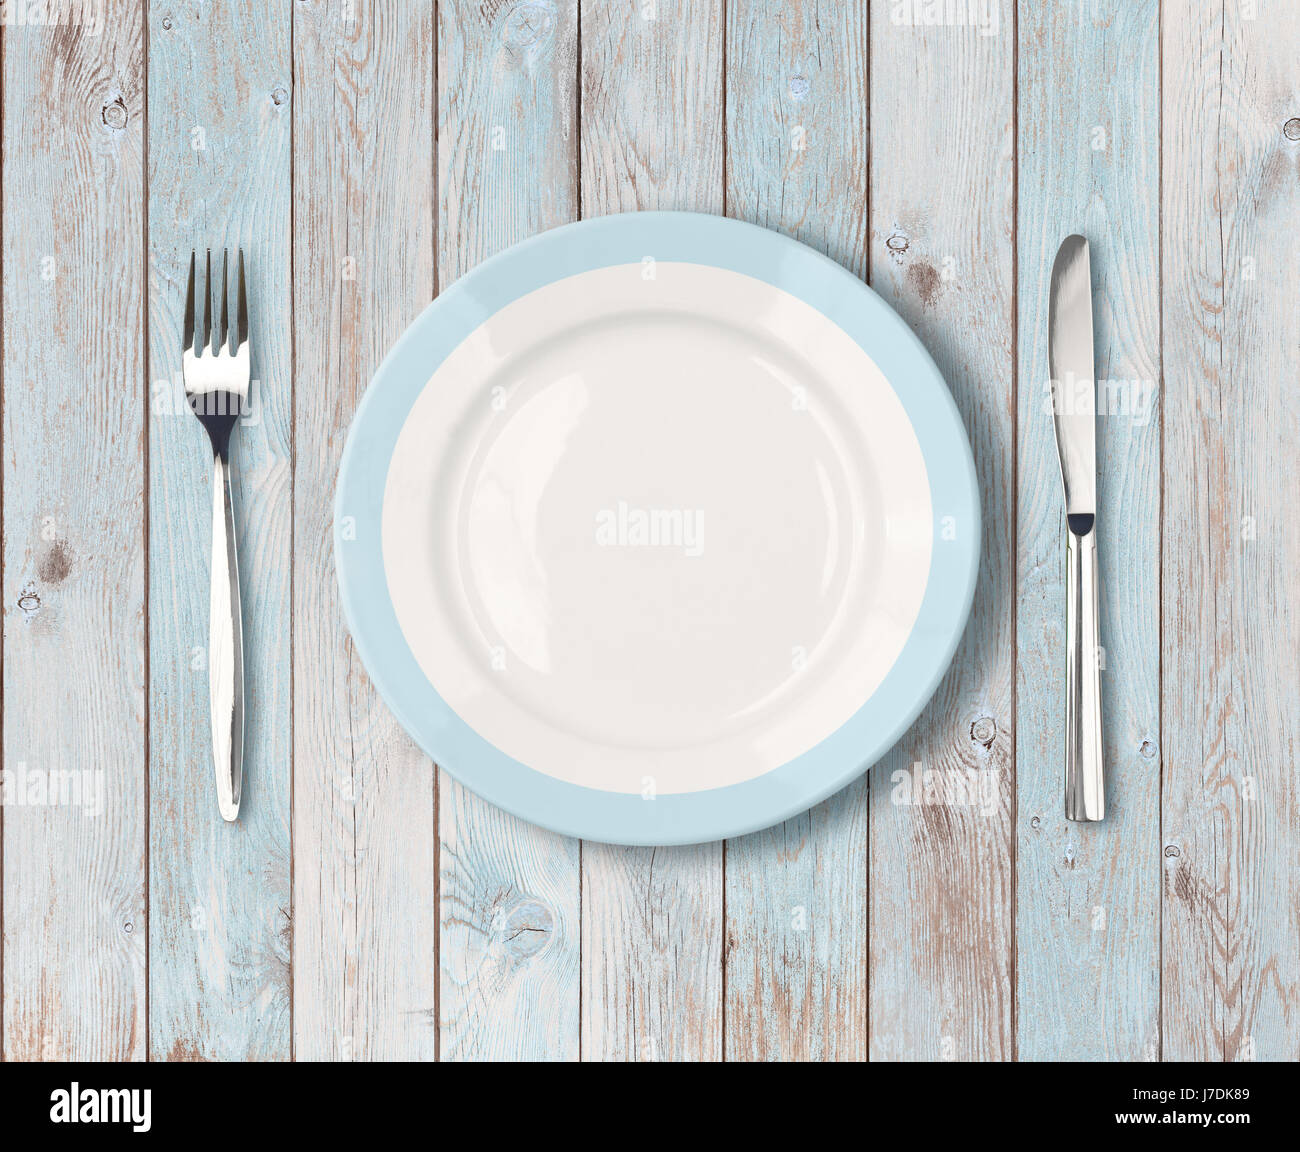 white empty dinner plate with blue border on wooden table Stock Photo